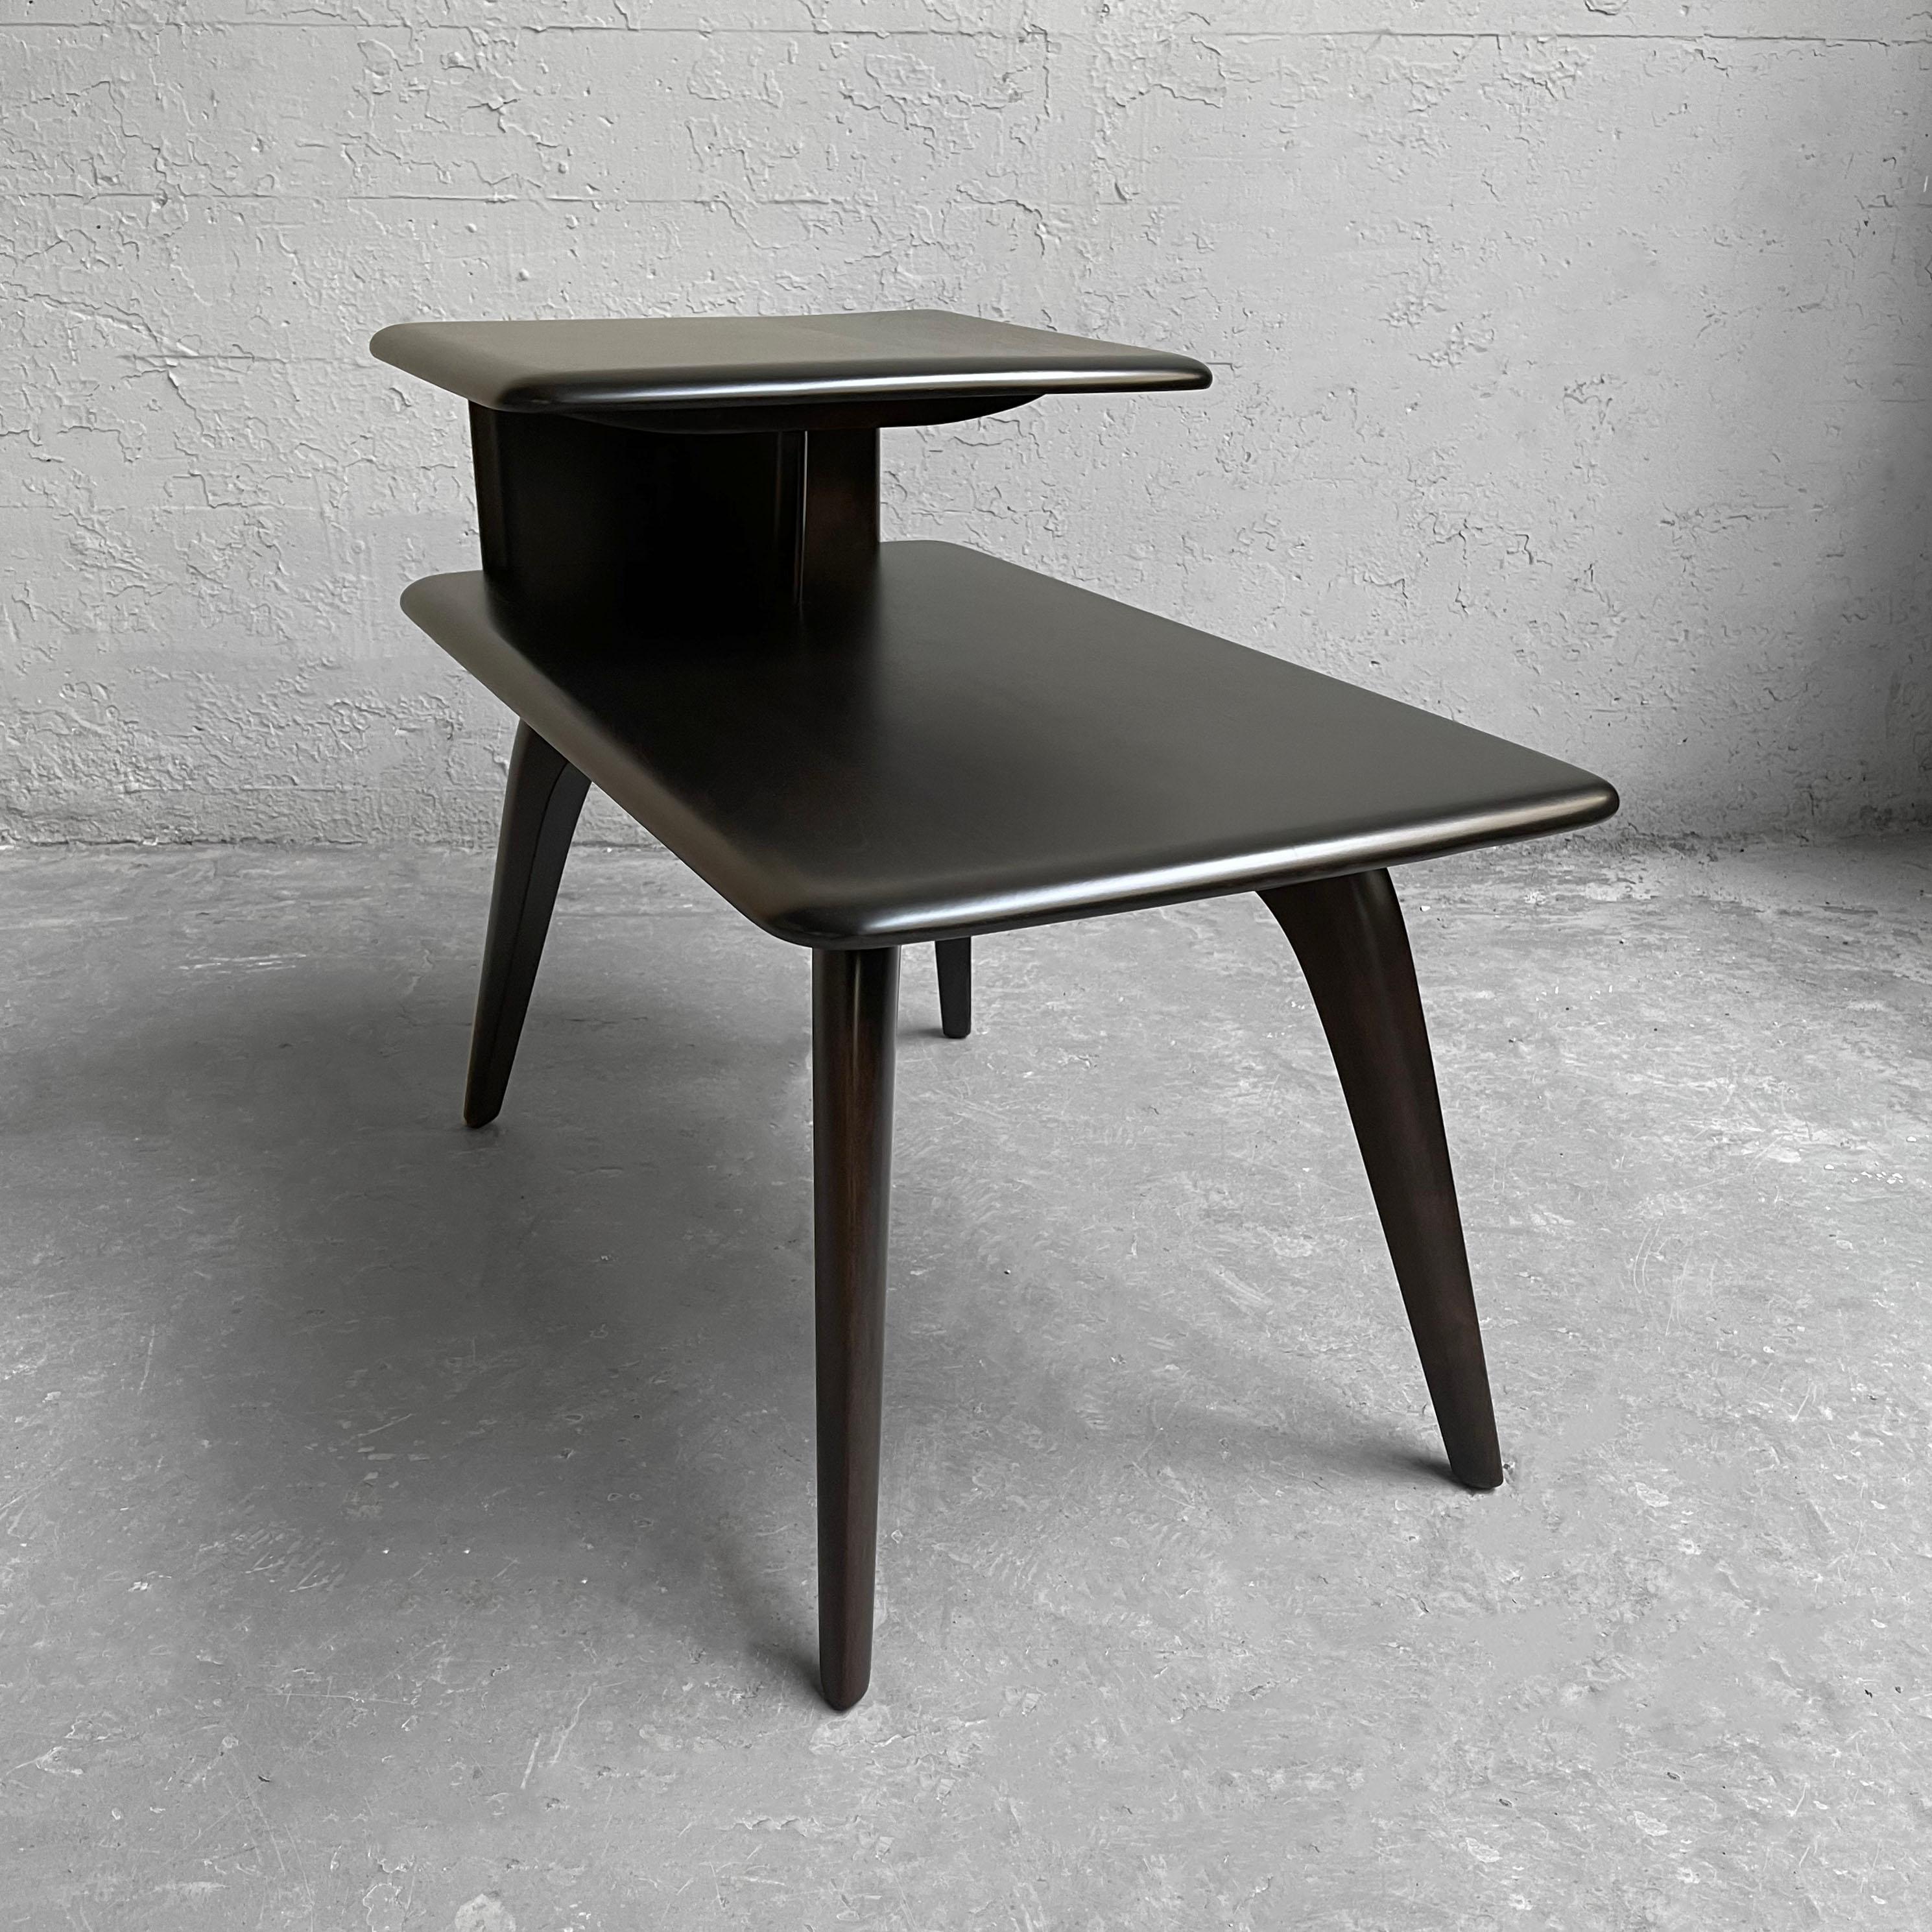 Classic, Mid-Century Modern, ebonized maple, step side table by Heywood Wakefield features a lower tier at 16 inches height and recessed upper tier at 16 inches deep.